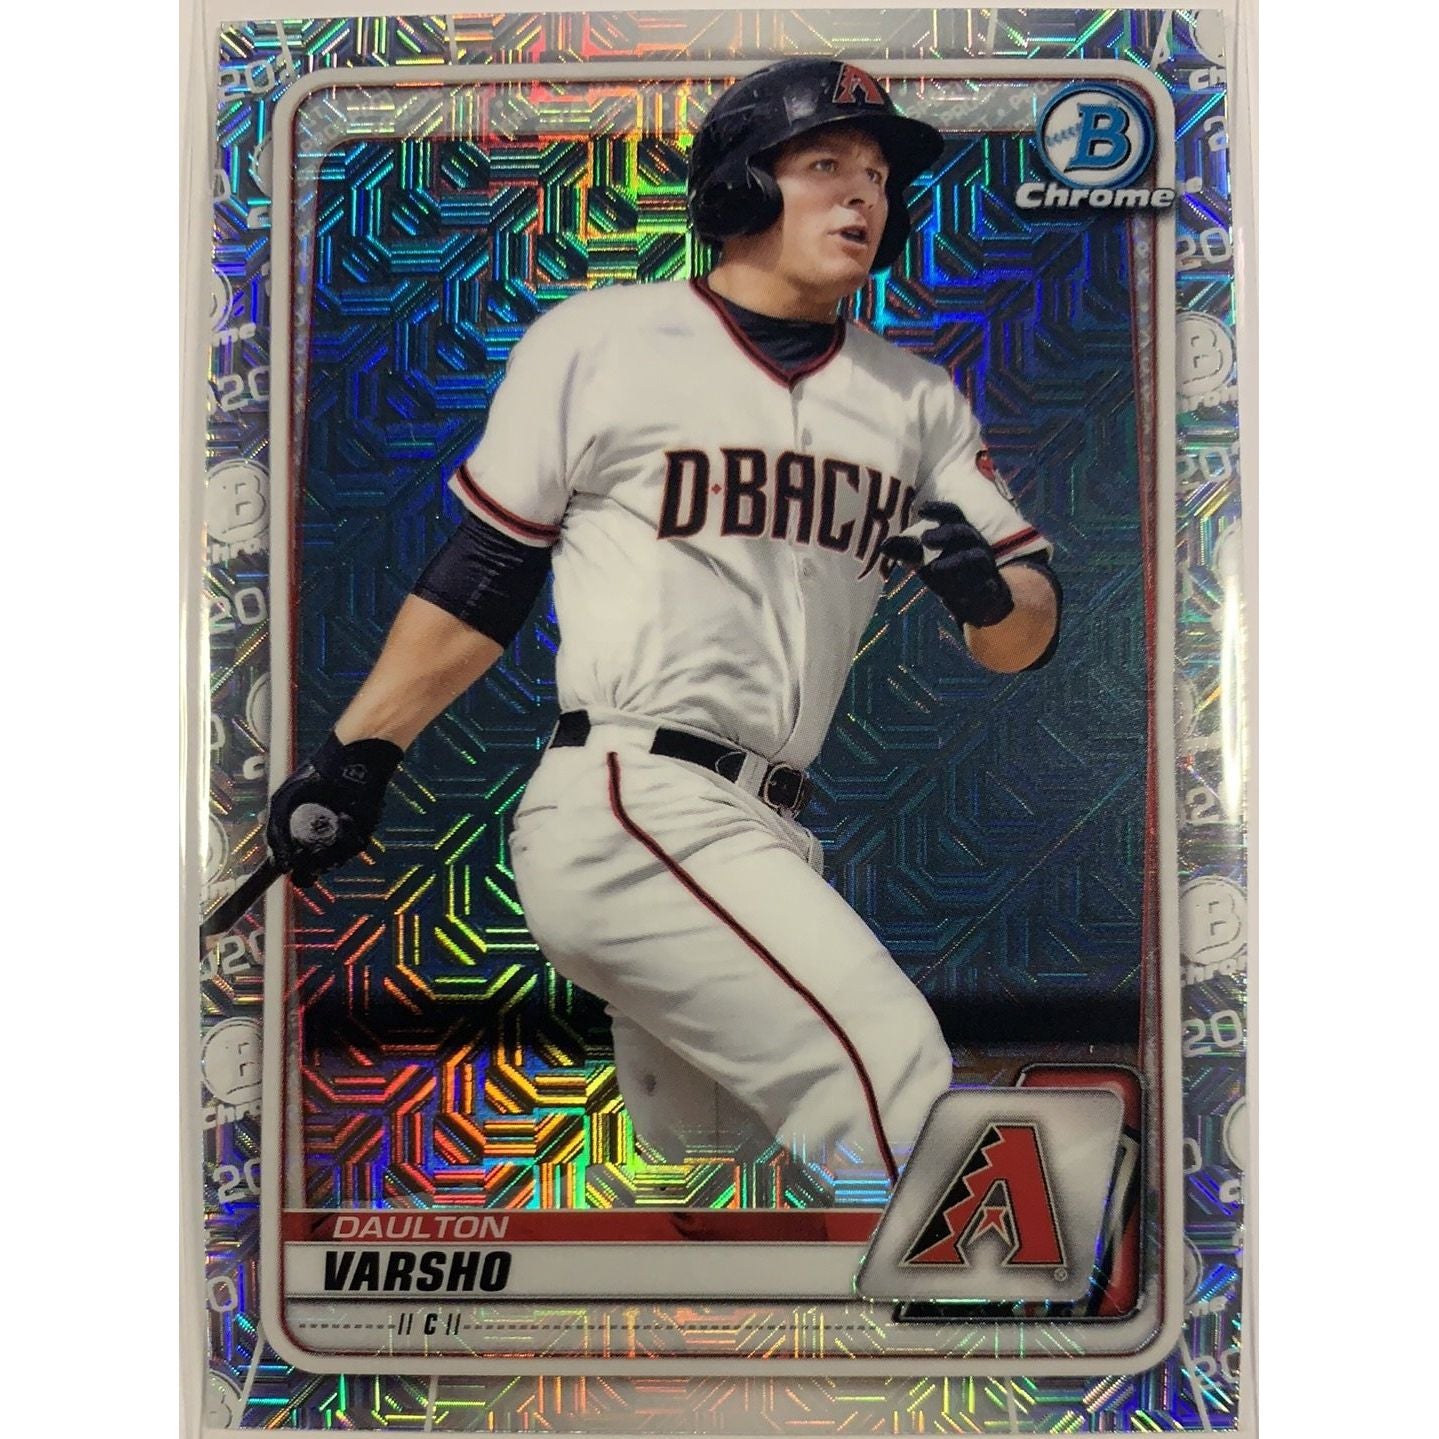  2020 Bowman Chrome Daulton Varsho Mojo Refractor  Local Legends Cards & Collectibles